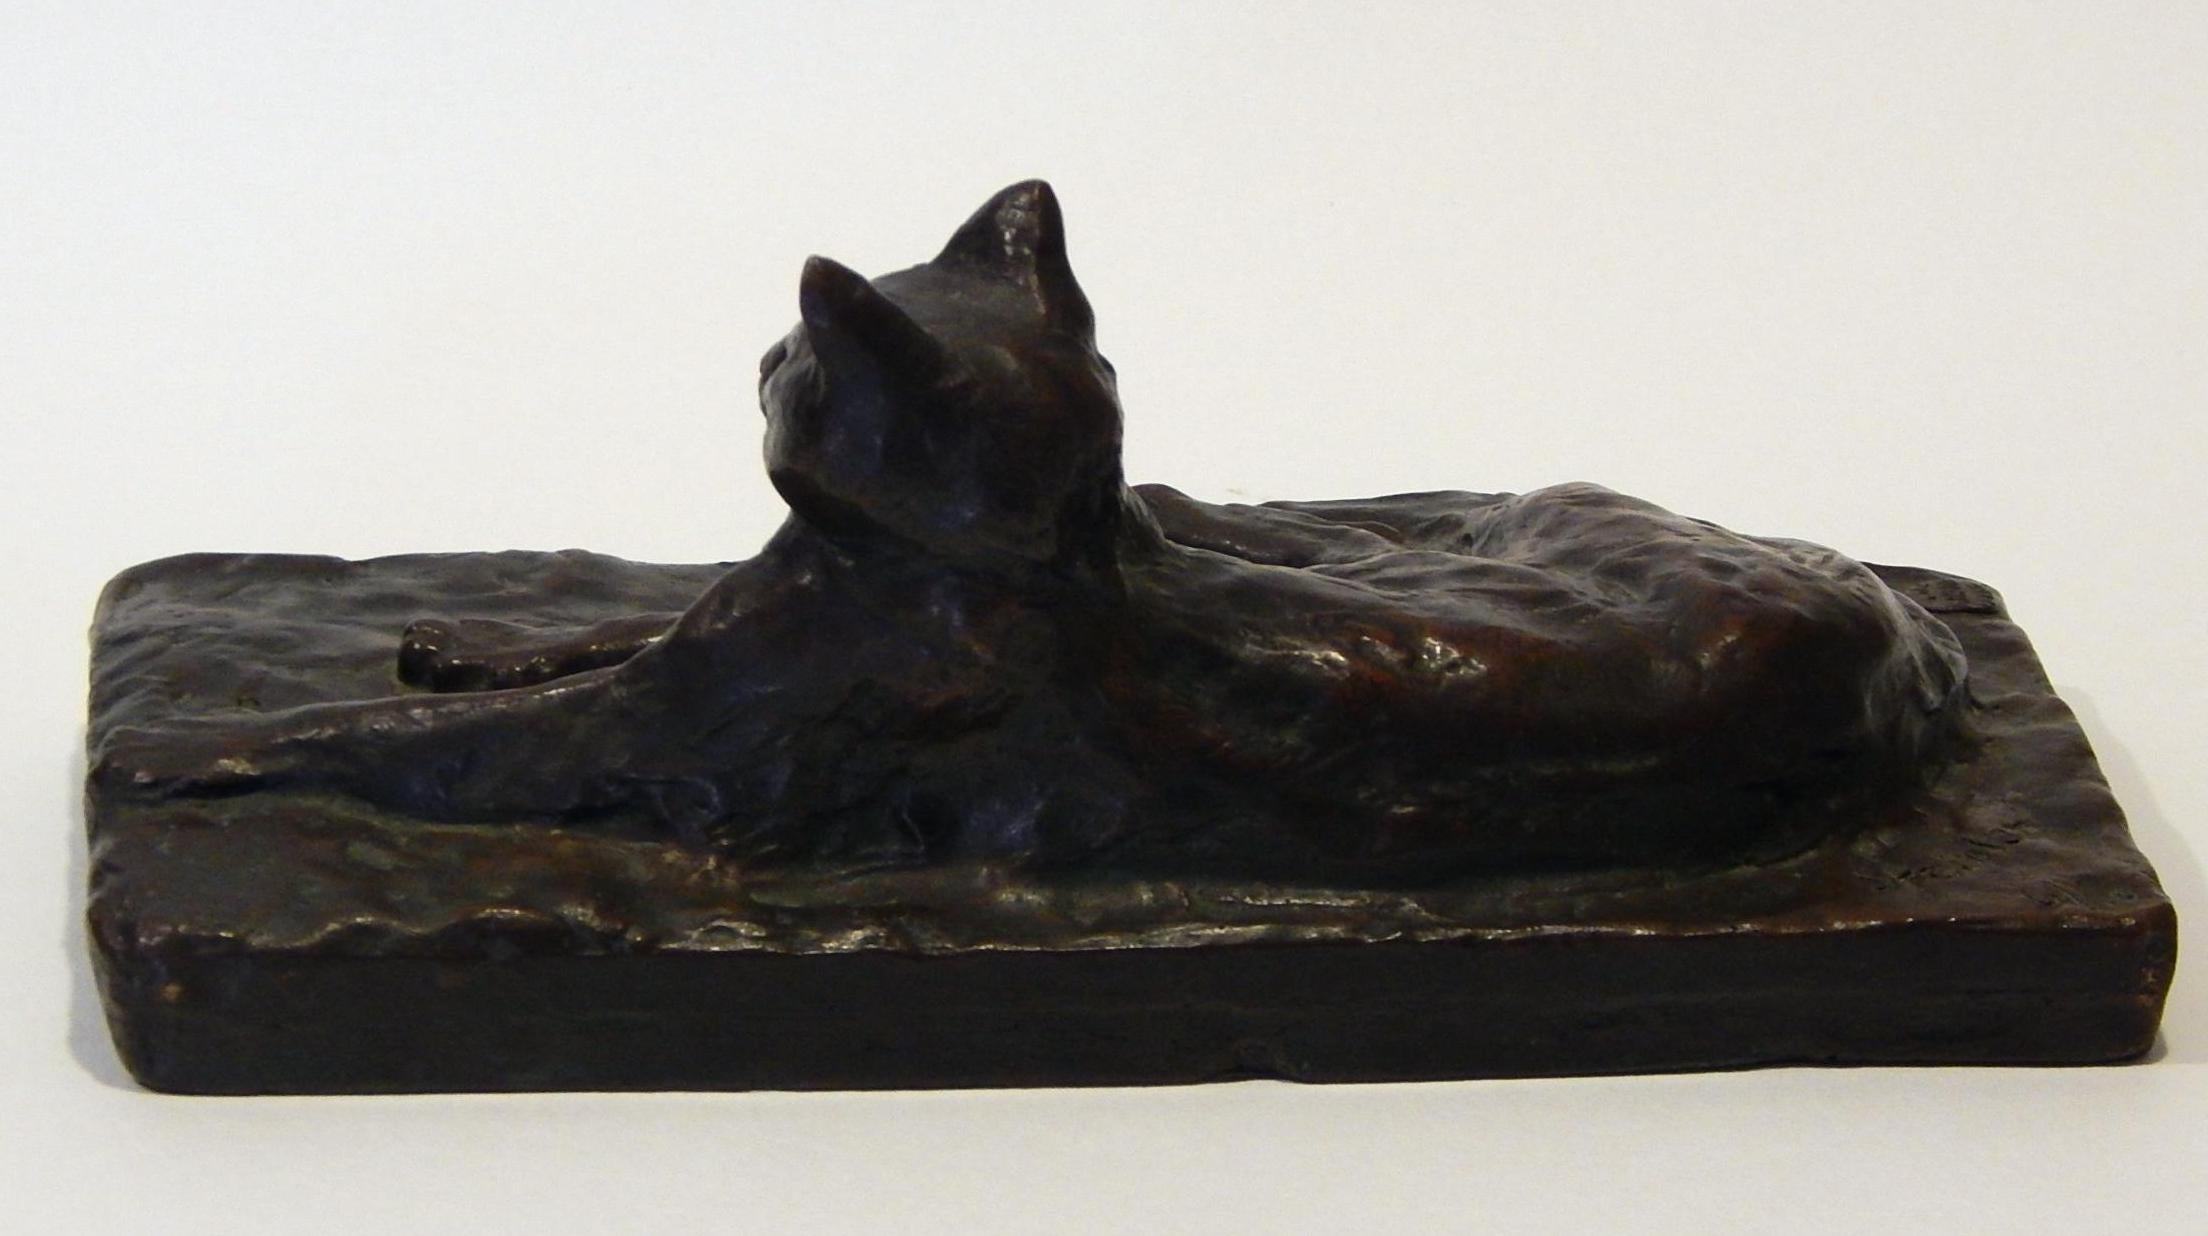 Beautiful vintage bronze sculpture by Theophile-Alexandre Steinlen (1859-1923) for the cat aficionado.
The Steinlen signature is seen on the base as well as the edition size: 6 of 10.
This work is in mint condition with a lovely patina and